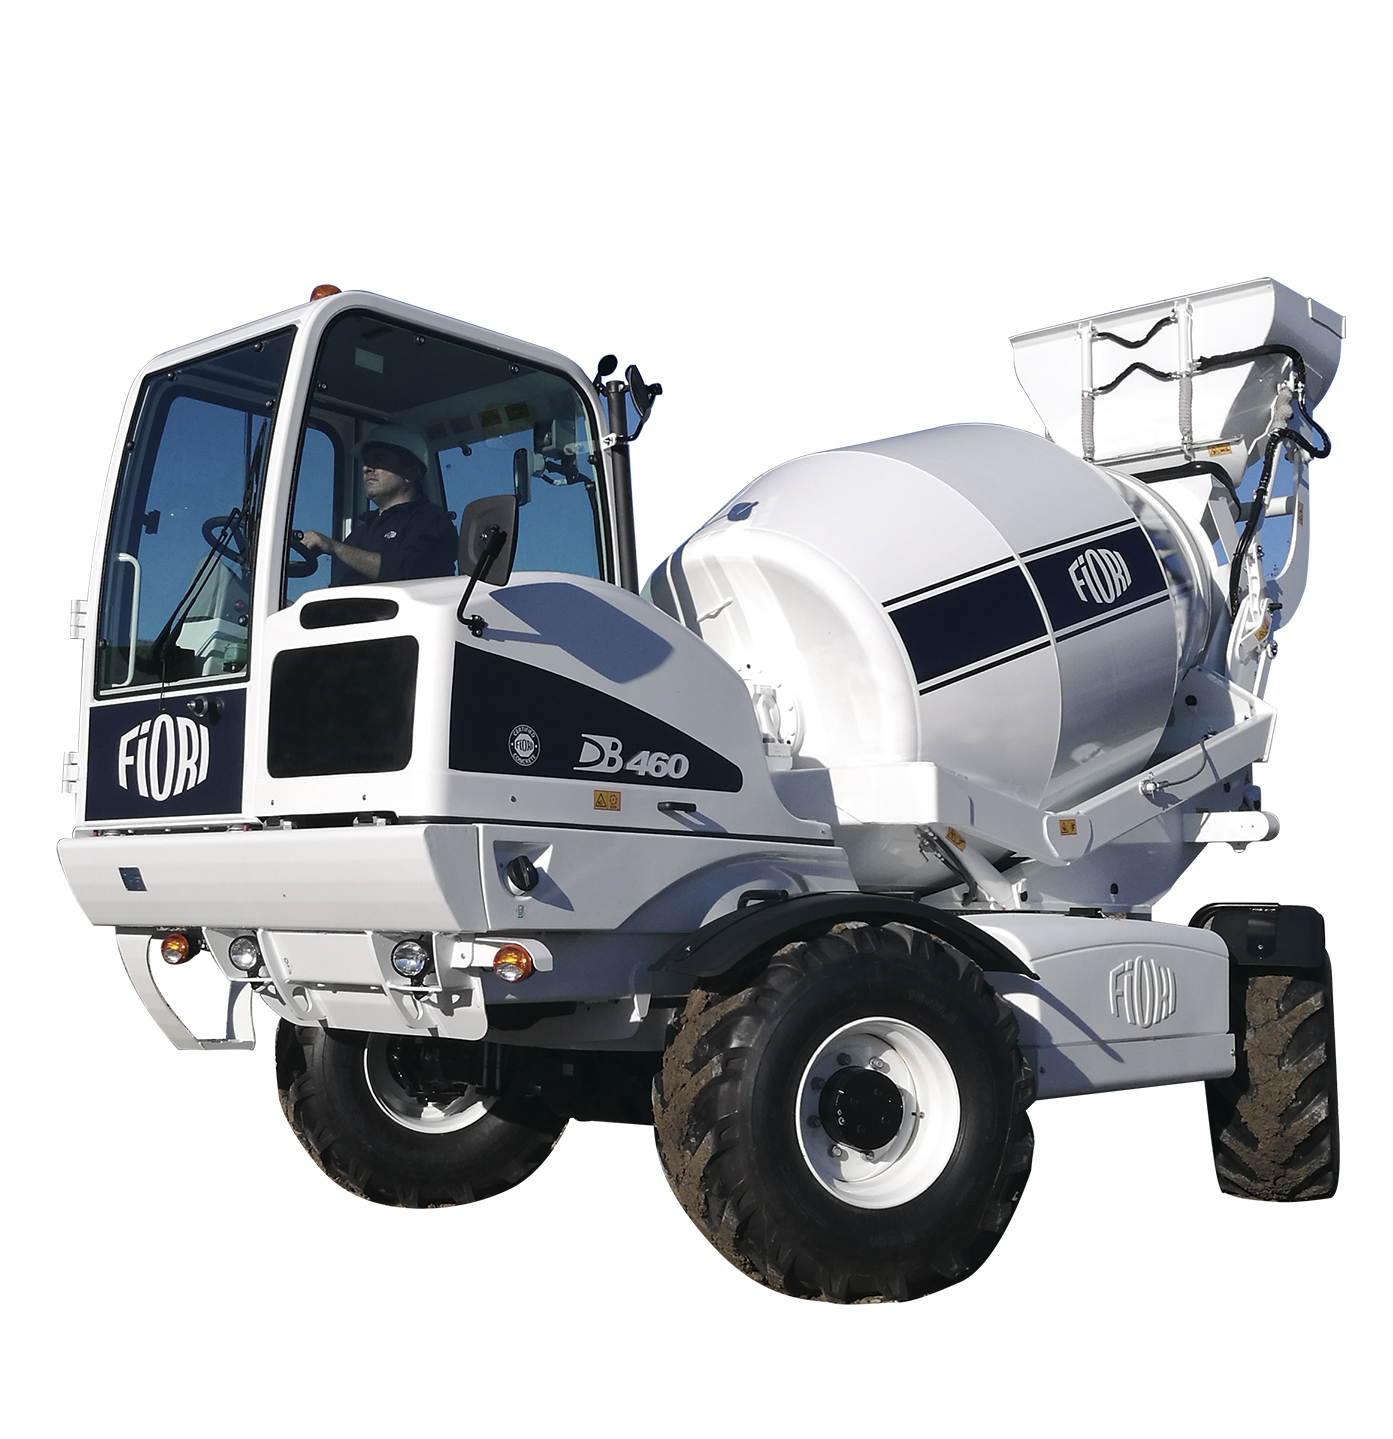 https://www.gmtractors.net/admin_gmt/view/setup_content/product/uploader/DB460.jpg